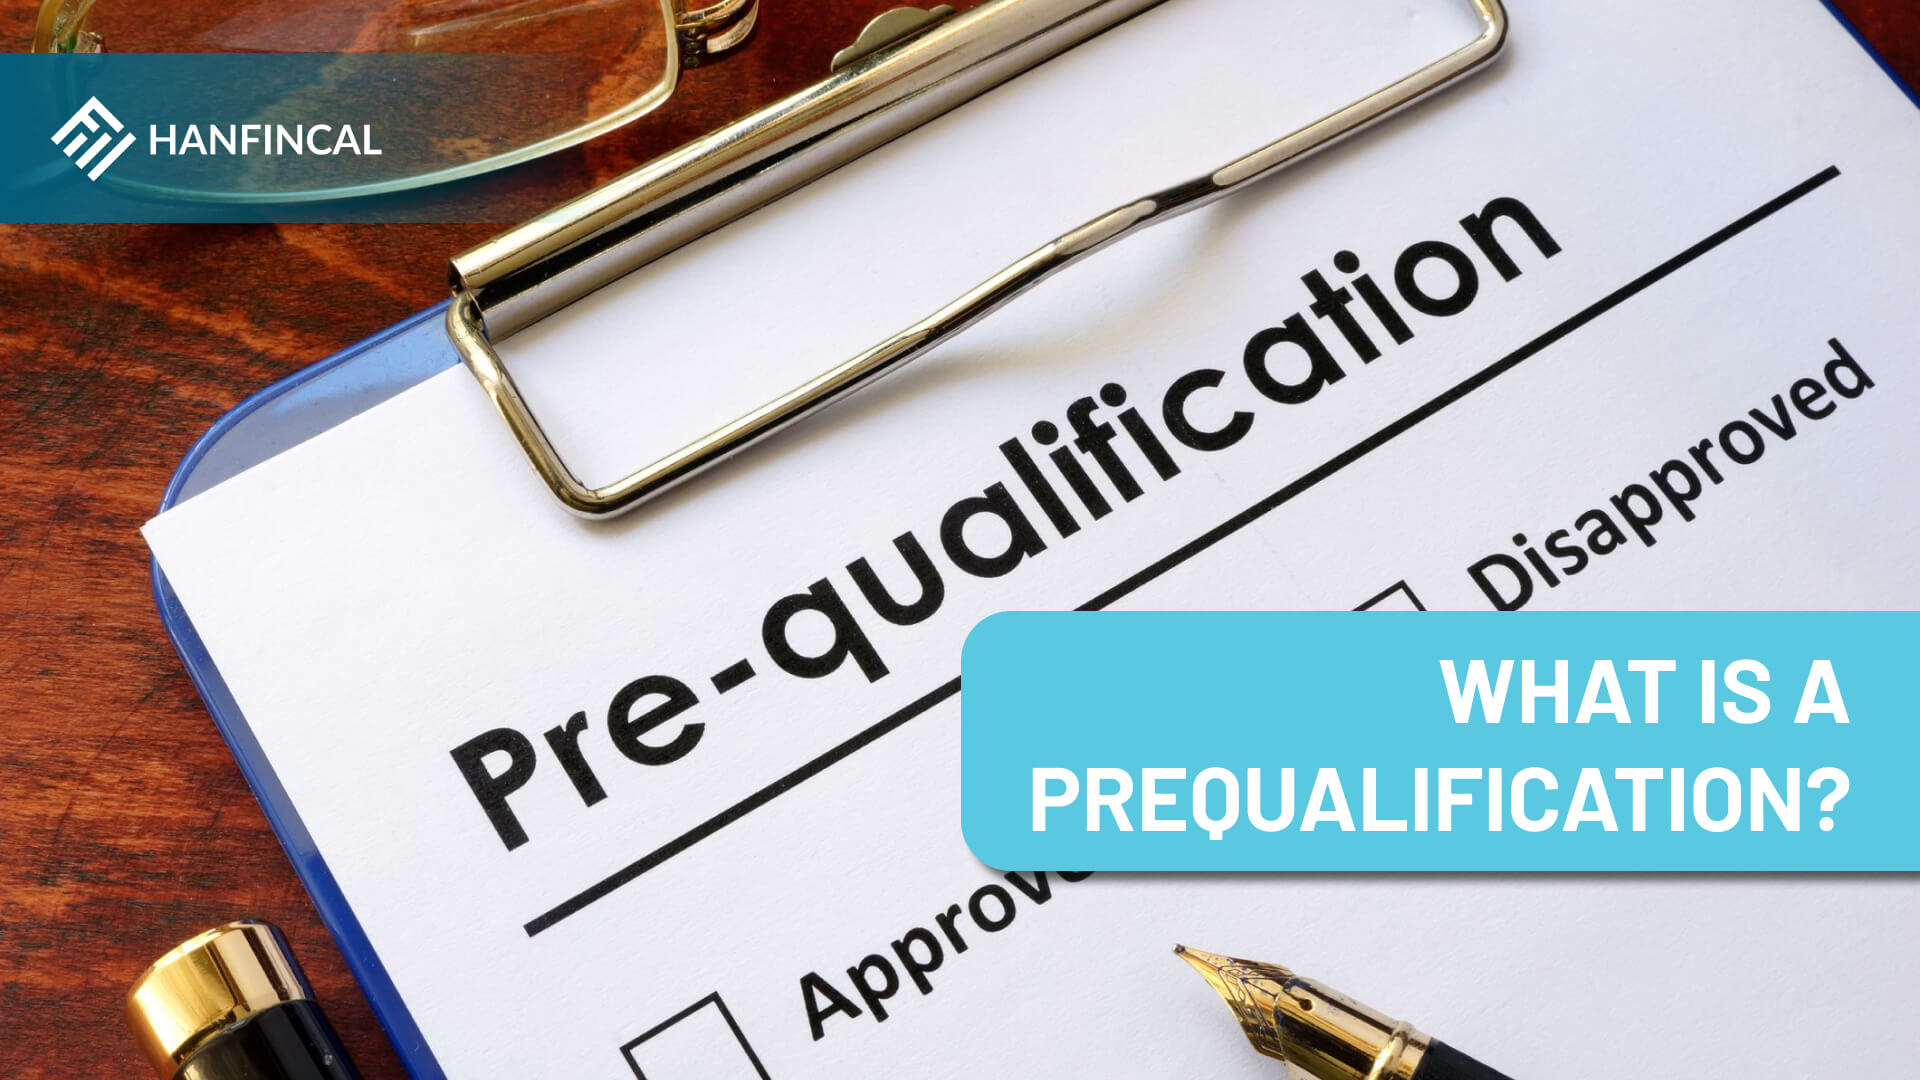 What is a prequalification?